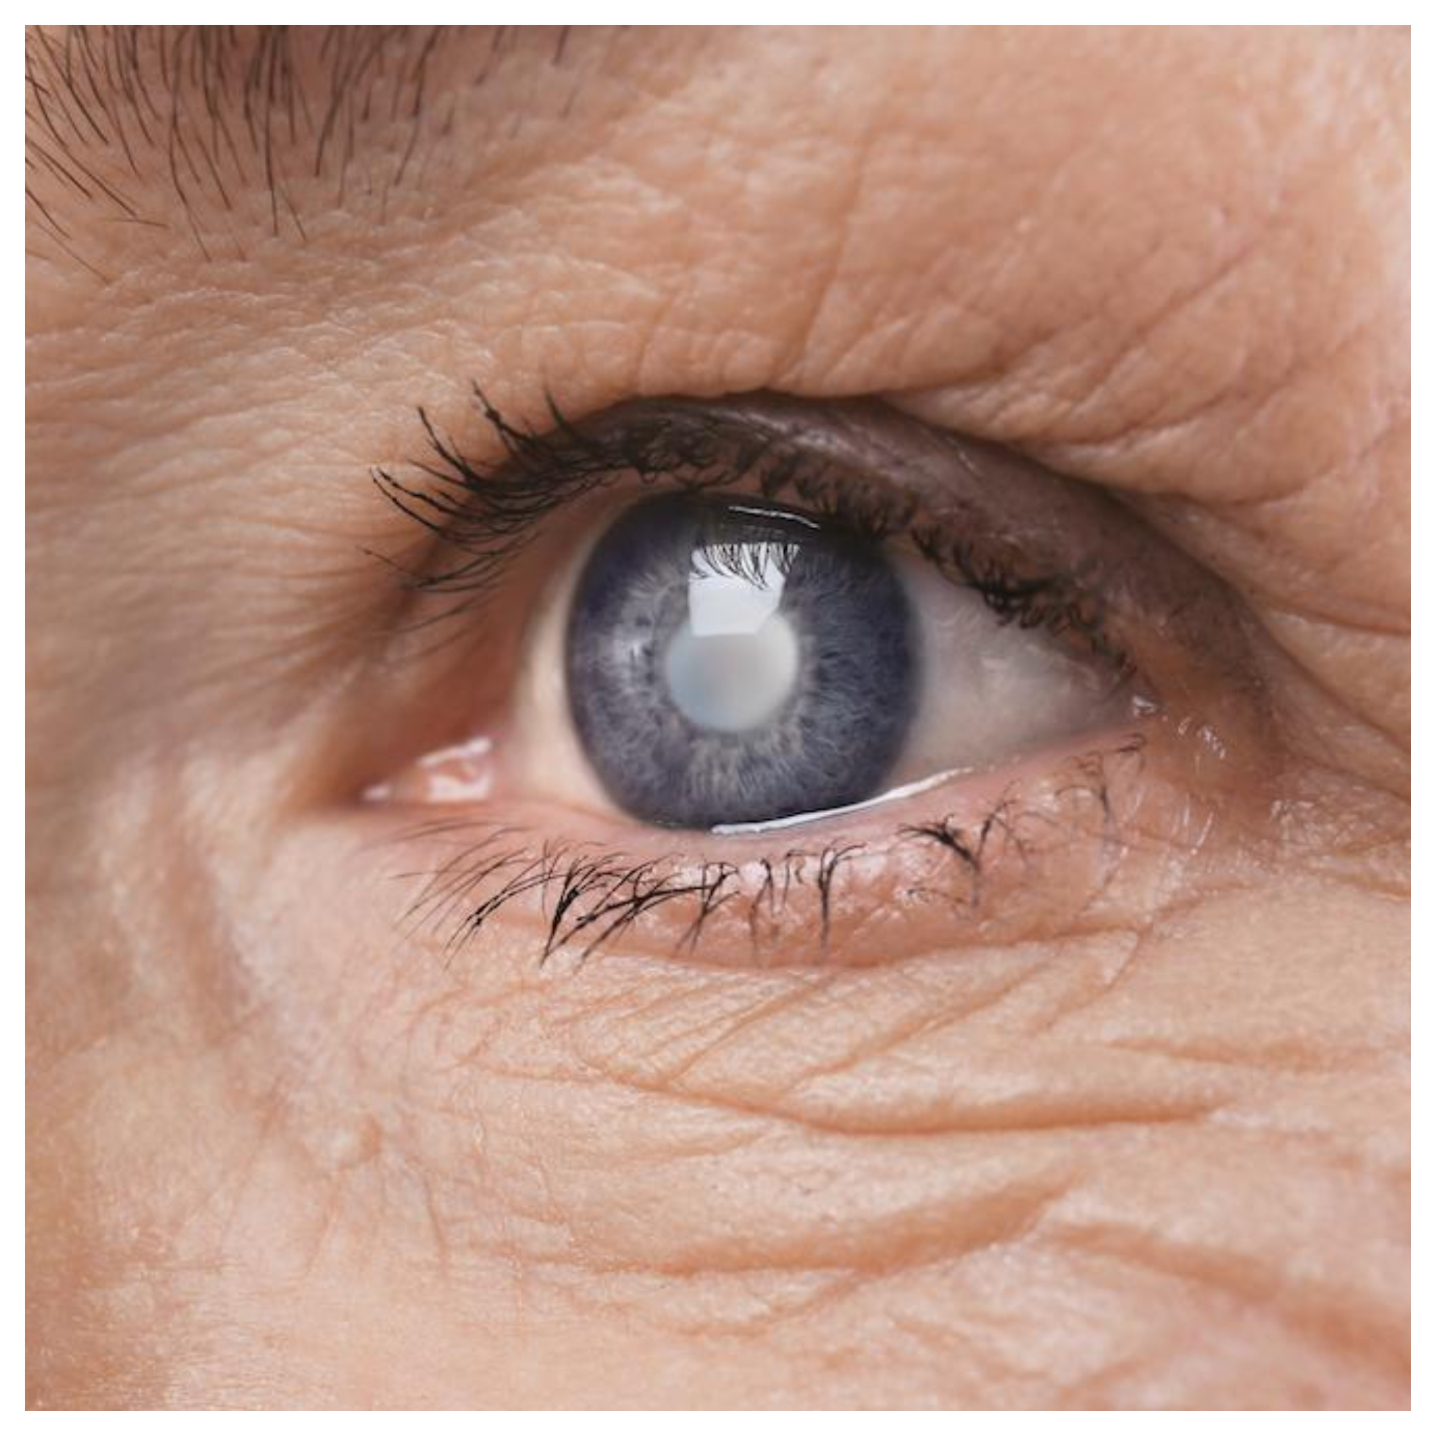 How to prevent sudden blindness from glaucoma —Ophthalmologists